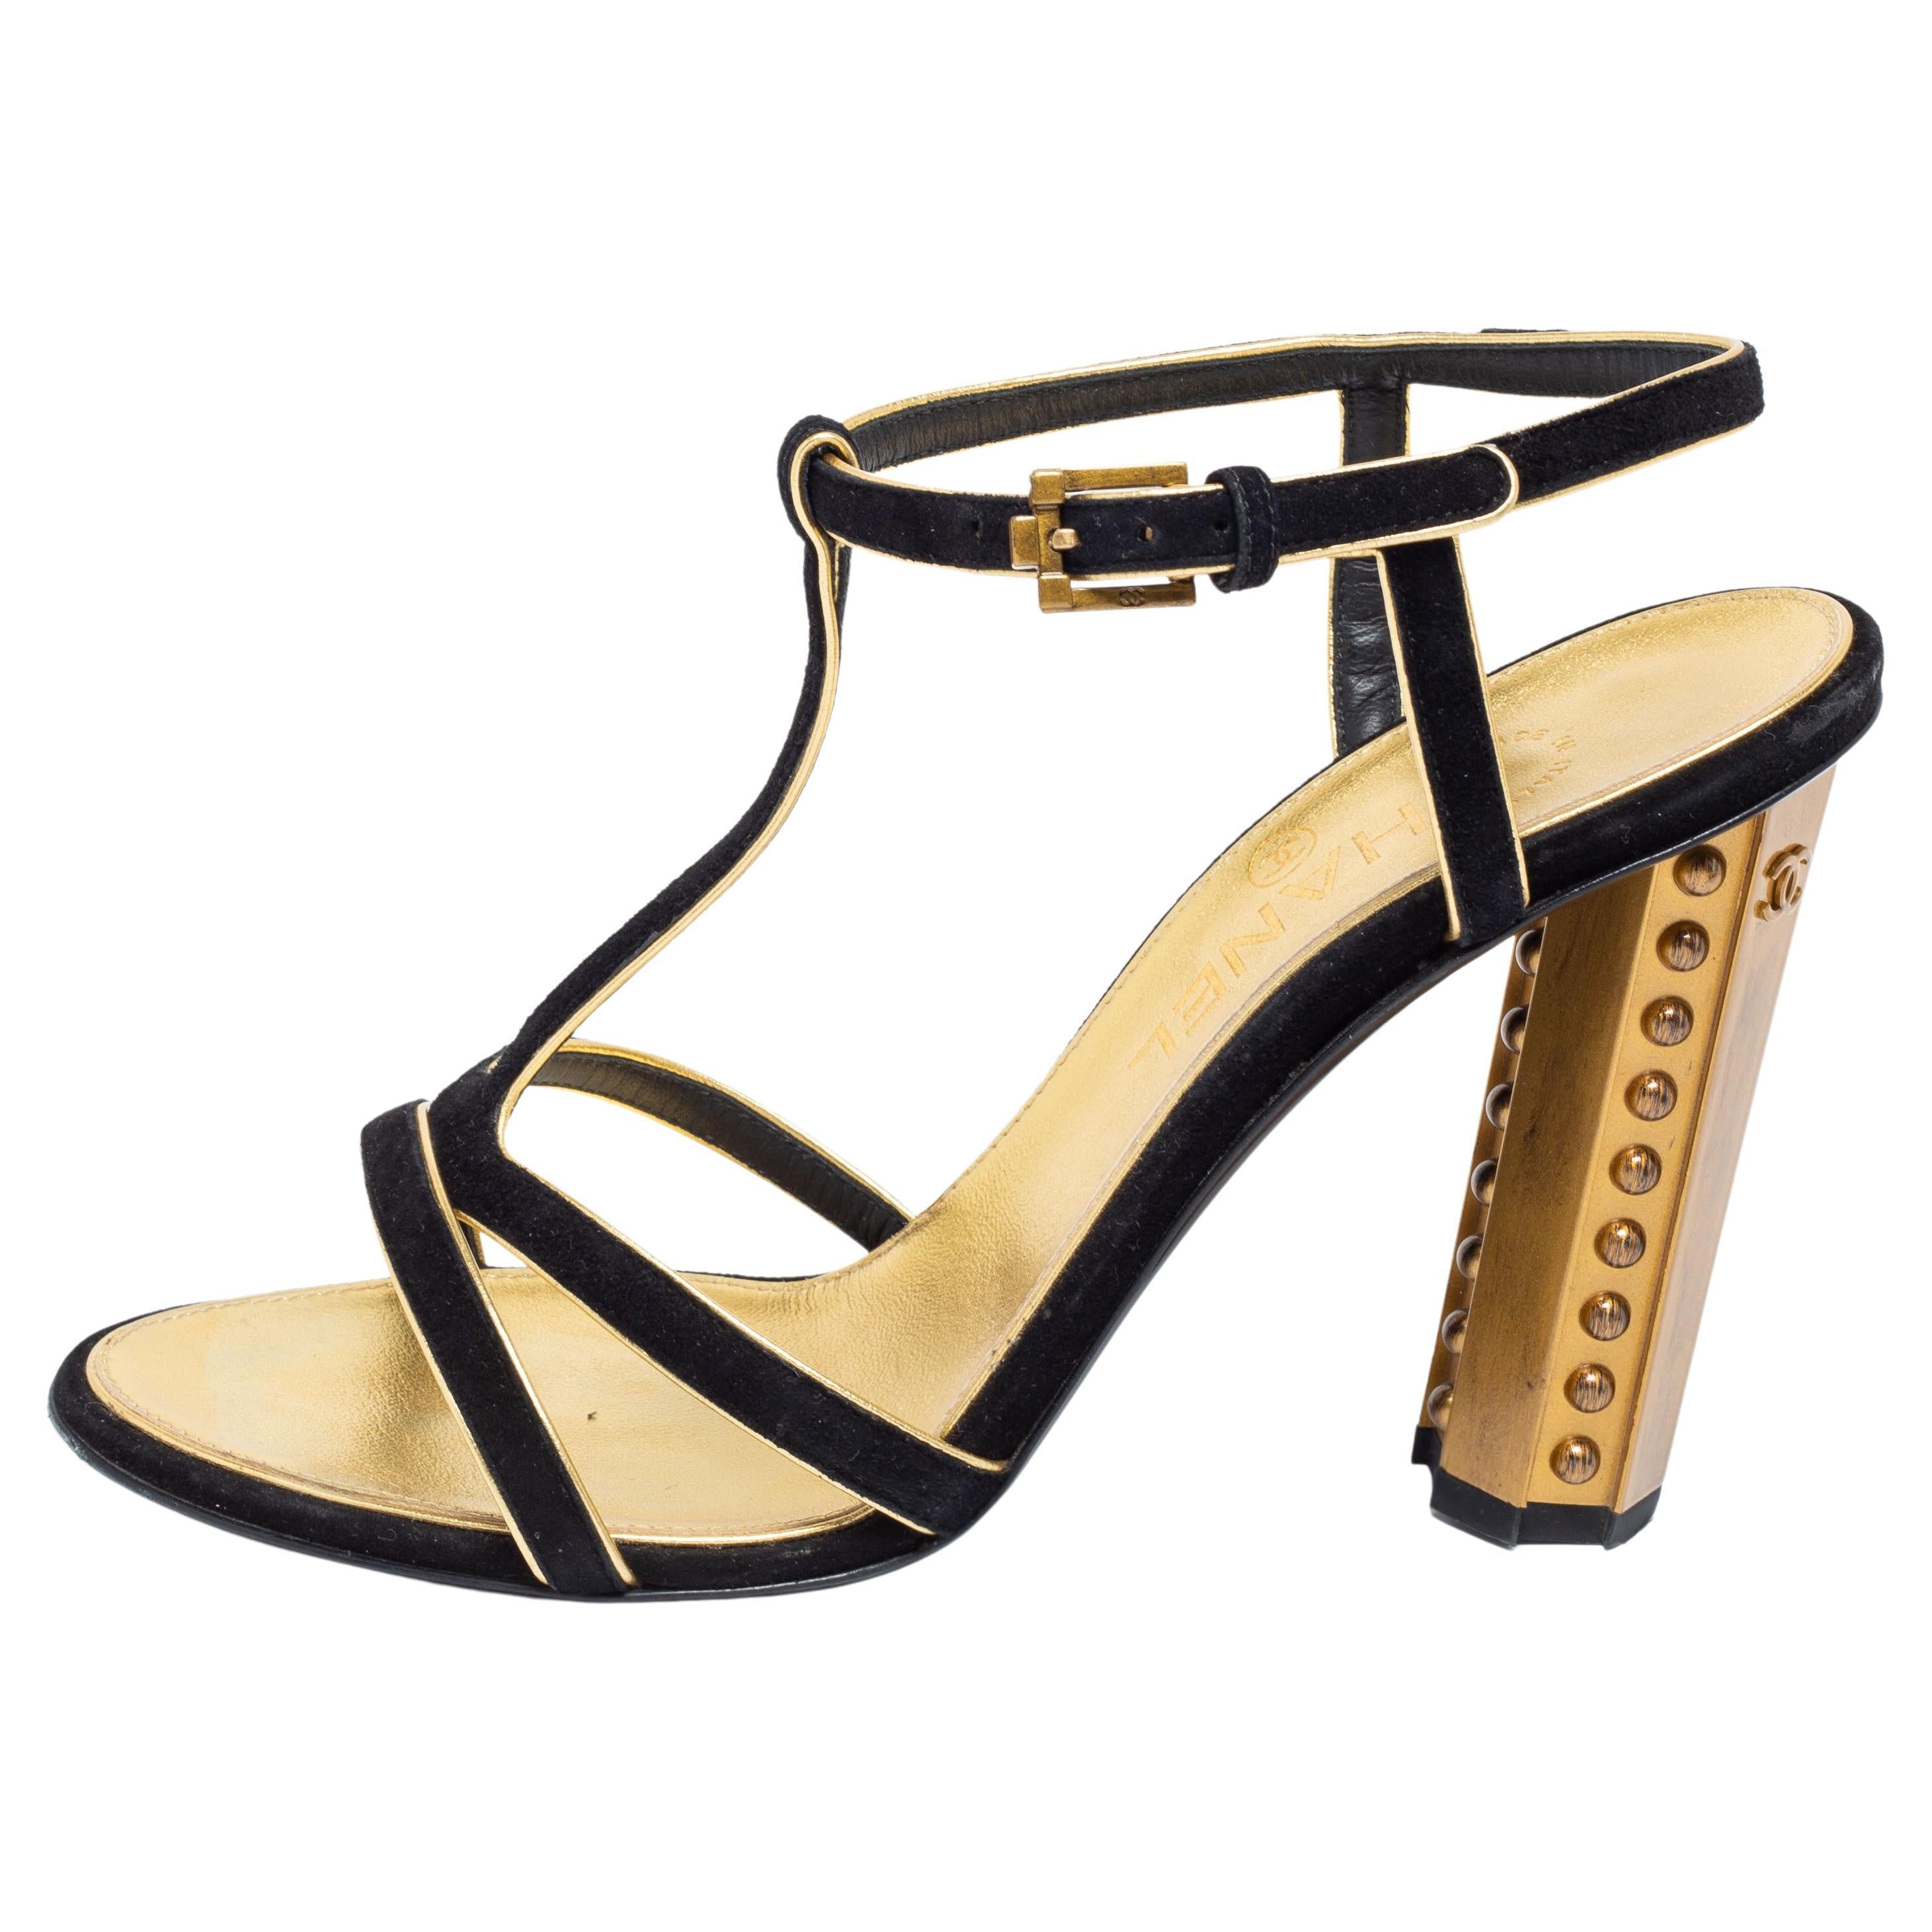 Chanel Black/Gold Suede And Leather Ankle Strap Sandals Size